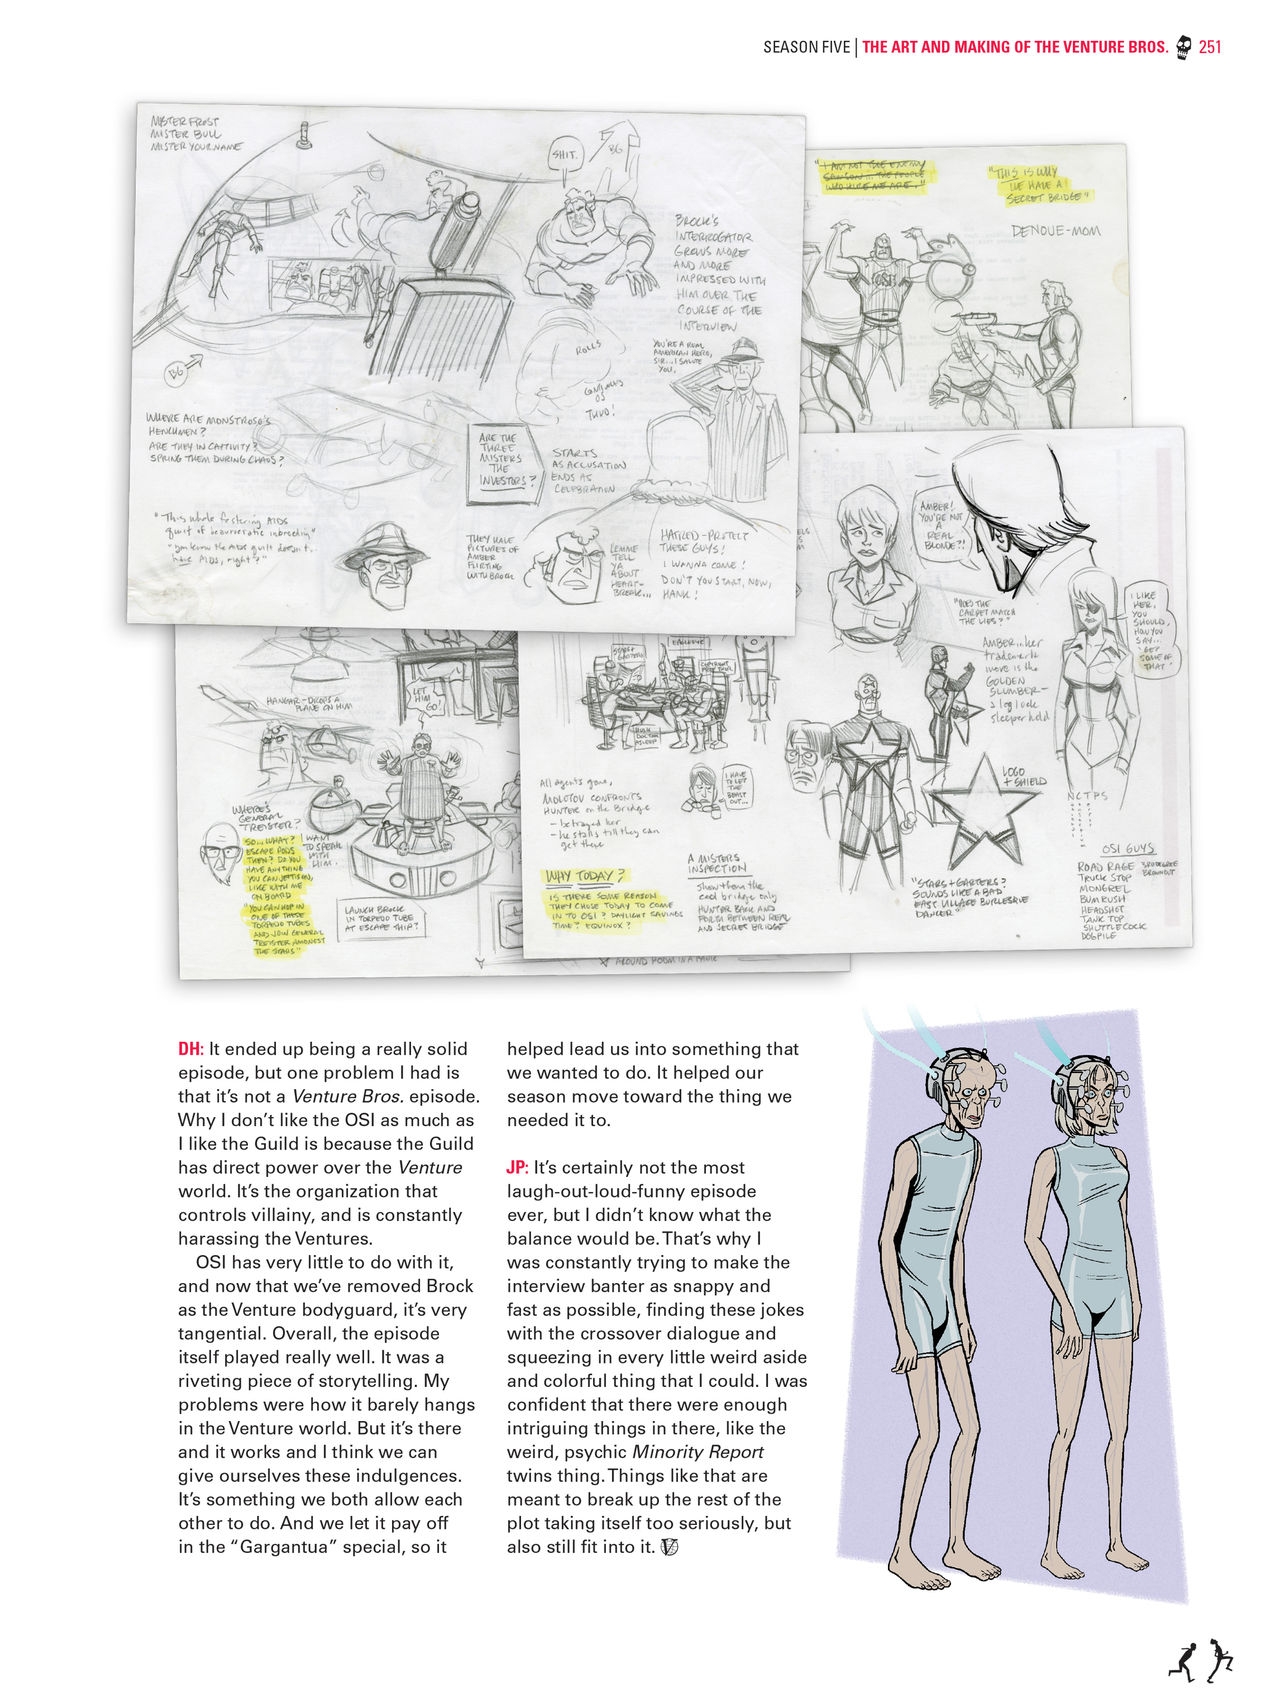 Go Team Venture! - The Art and Making of the Venture Bros 249